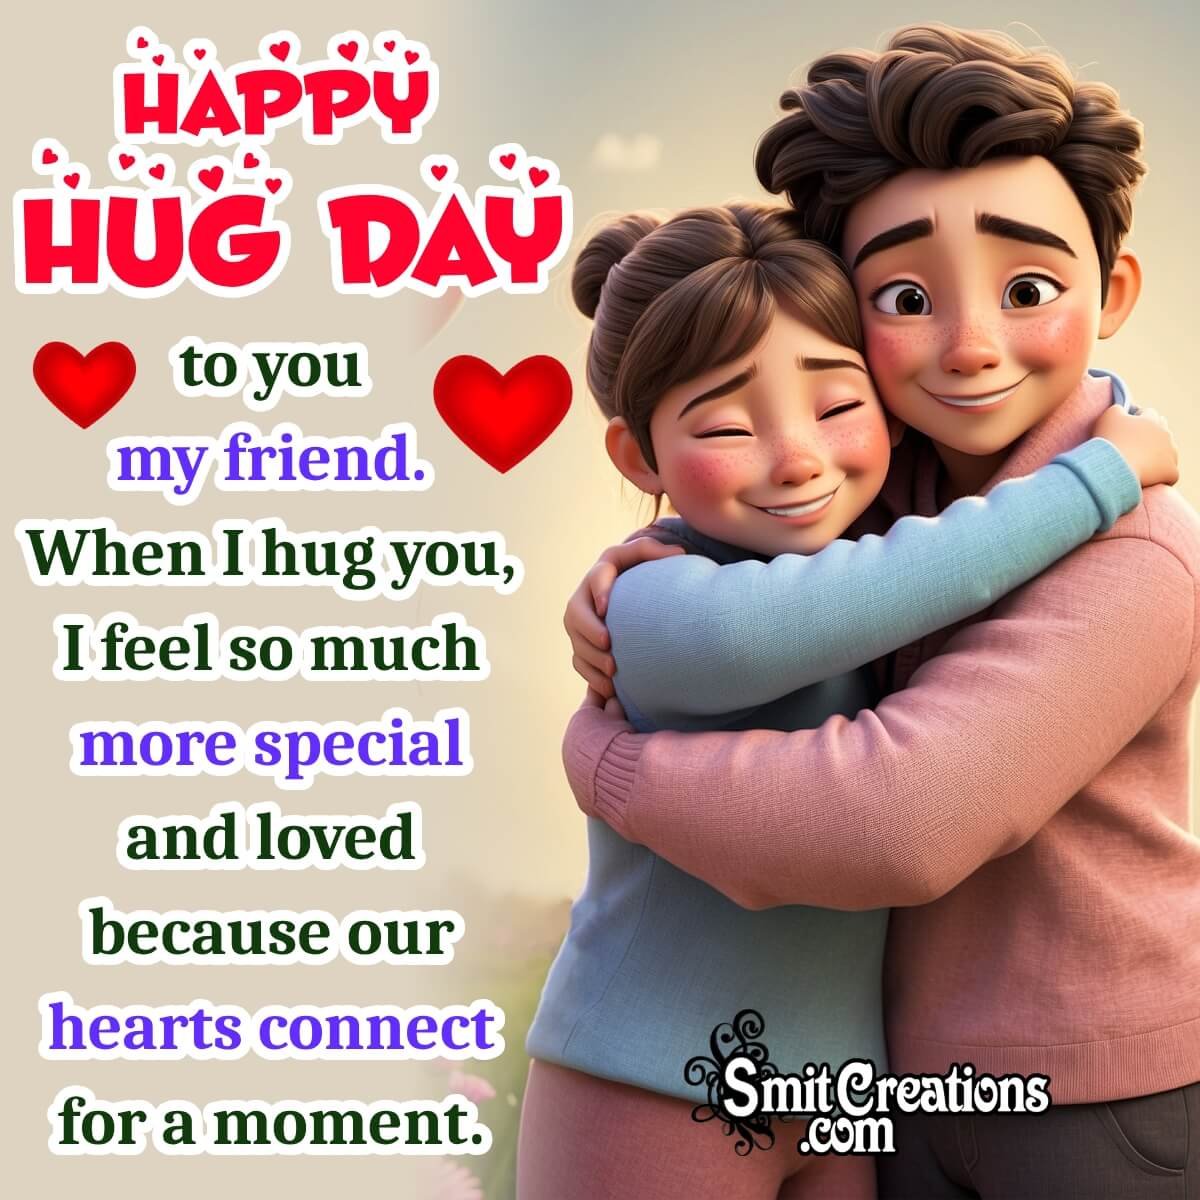 Happy Hug Day Wishes For Friend